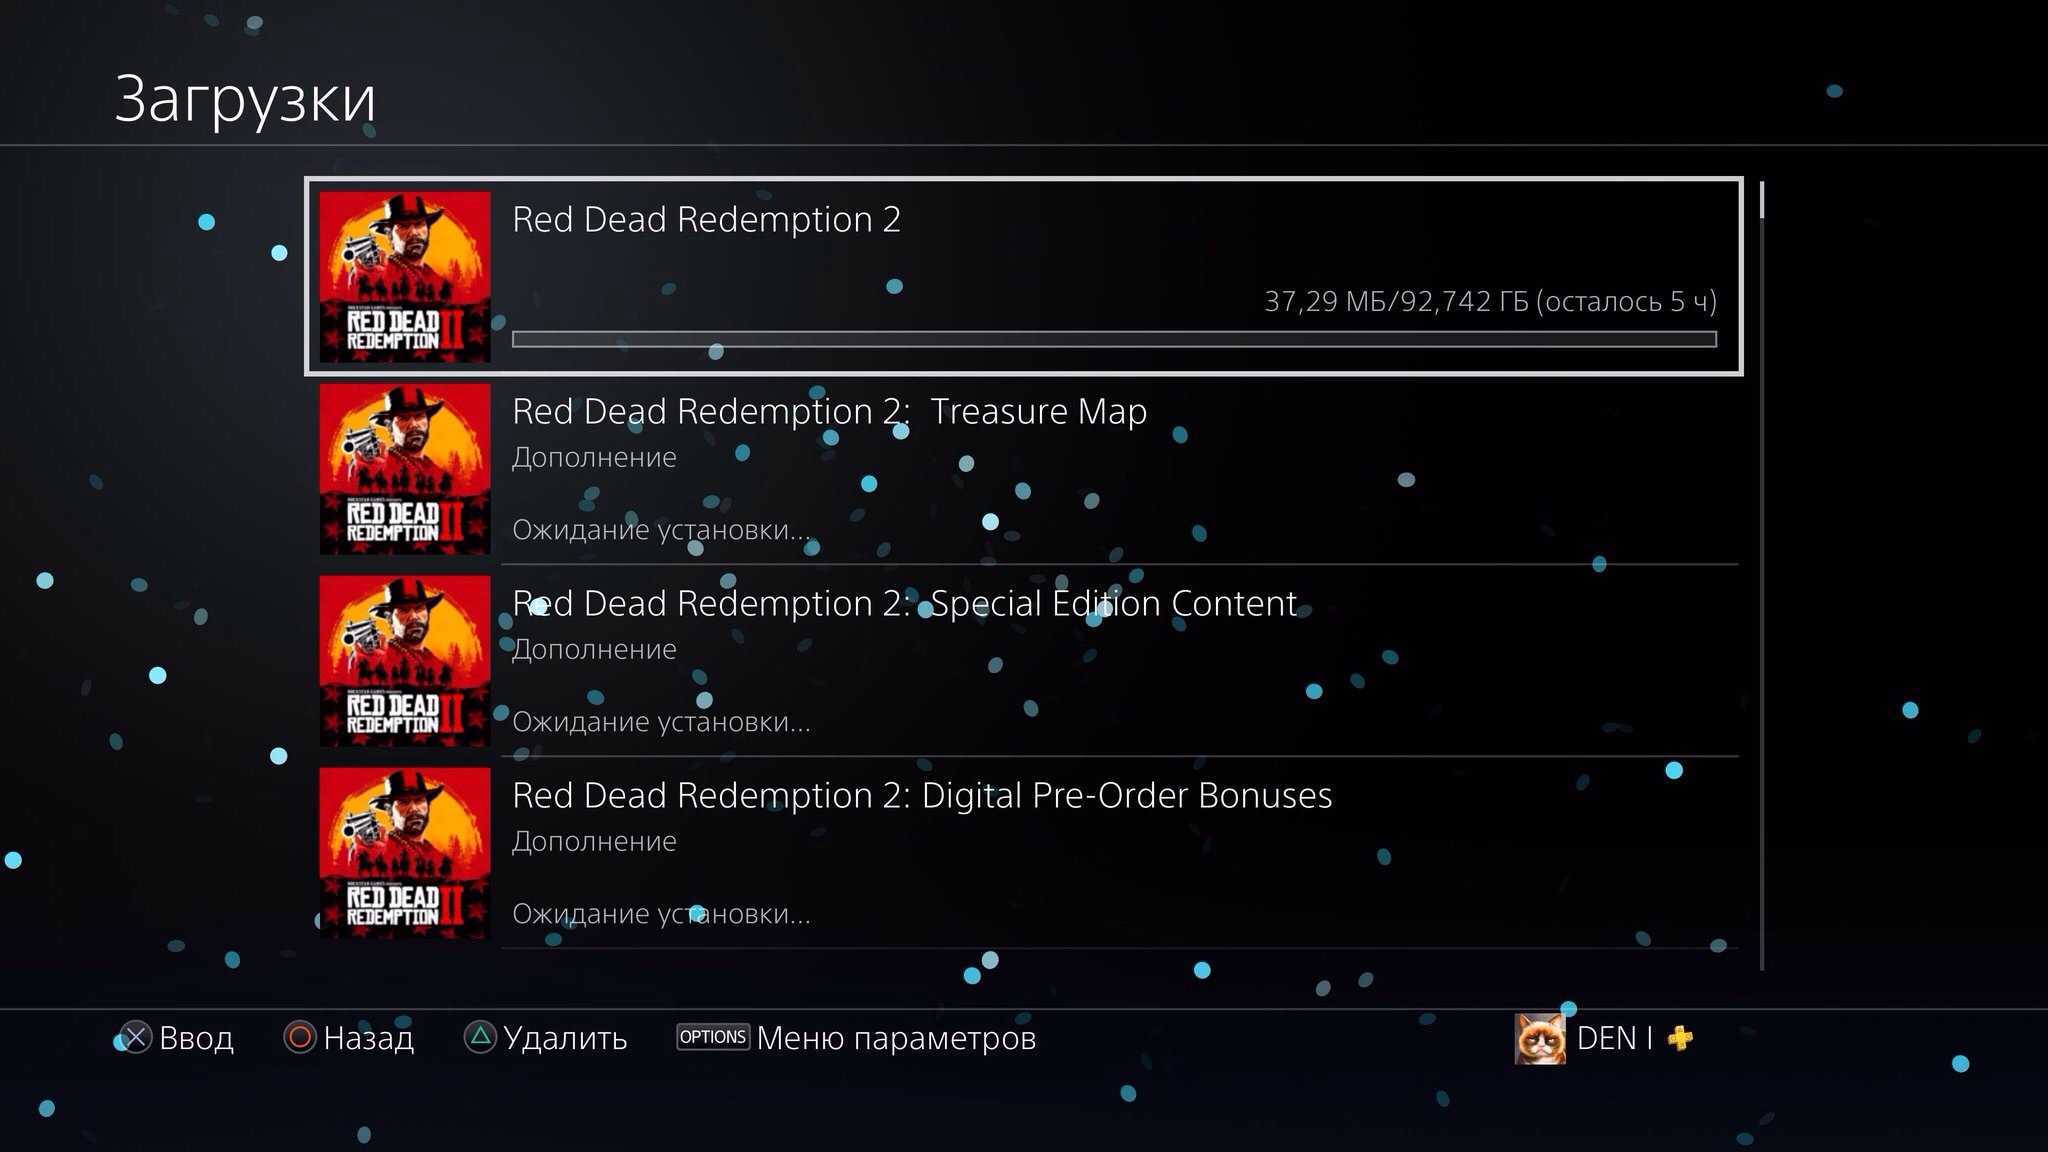 Red cheat. Код ред дед редемпшон 2. Чит коды на Red Dead Redemption 2 ps4. Чит коды на РДР 2 на пс4. Red Dead Redemption 2 читы.